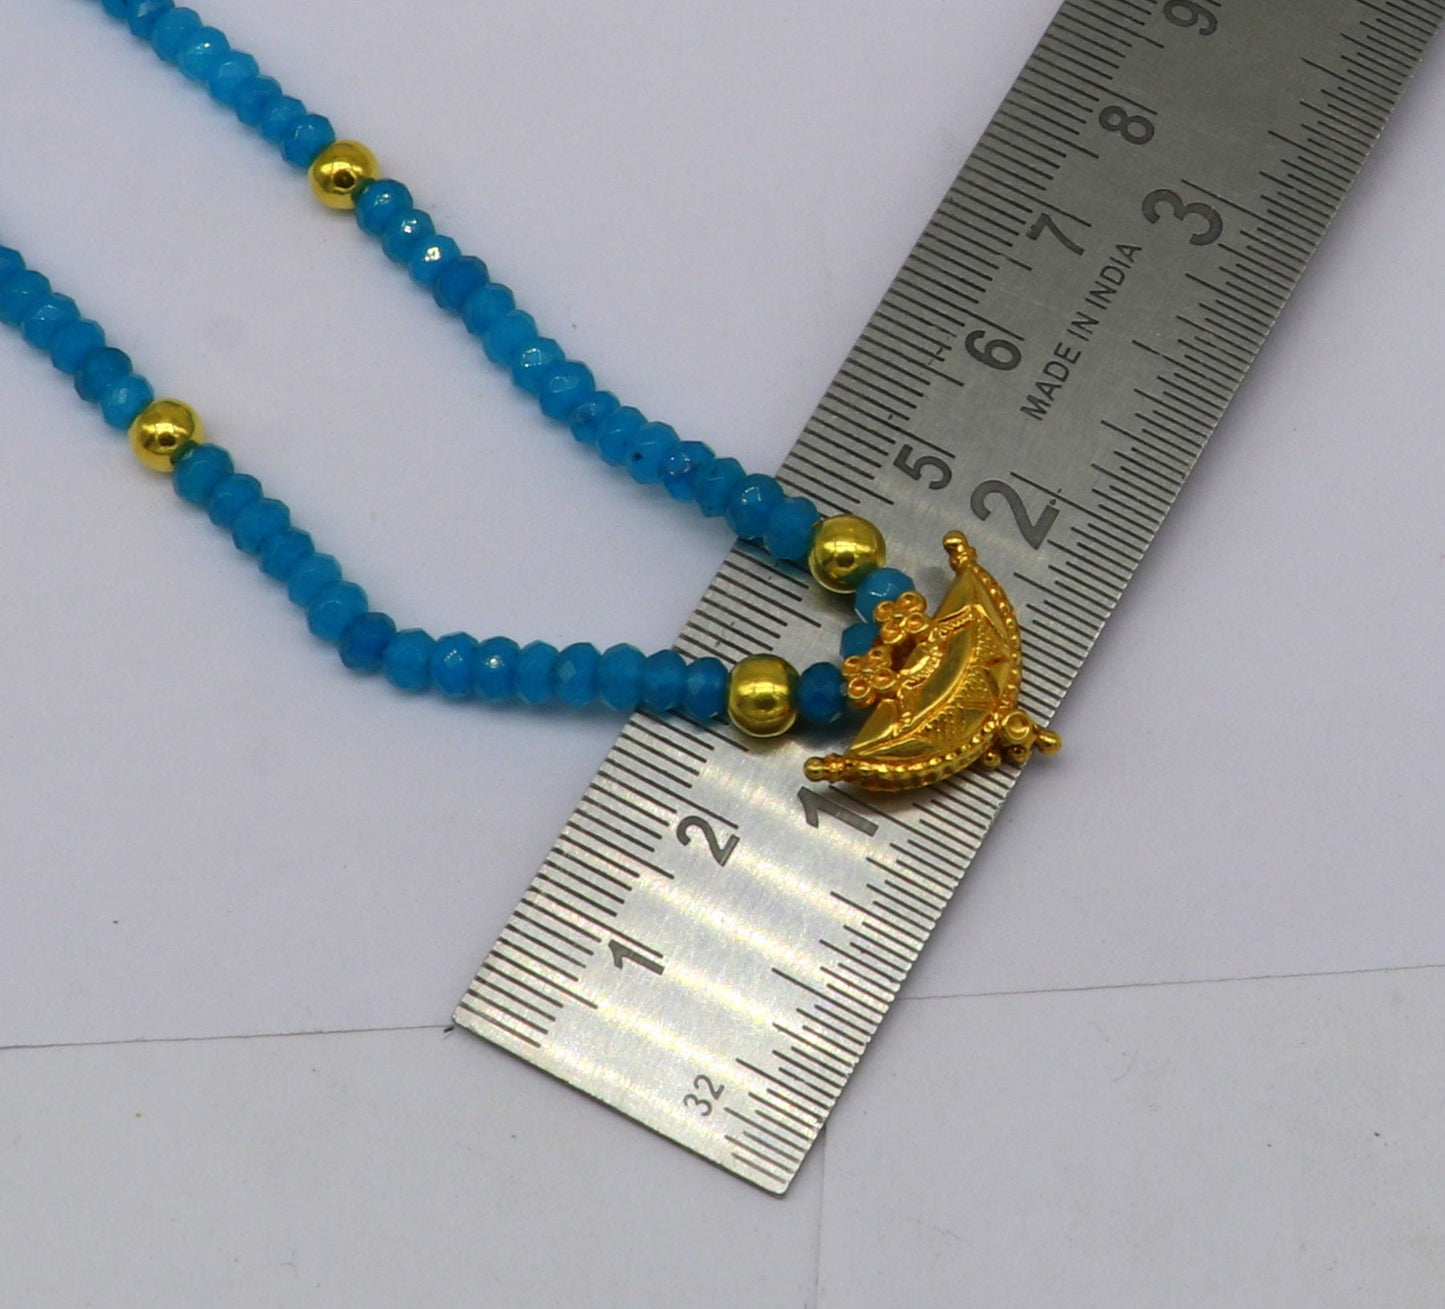 18" faceted blue color beaded necklace, 20kt yellow gold amulet stylish pendant, vintage customized brides gift tribal ethnic jewelry ap07 - TRIBAL ORNAMENTS